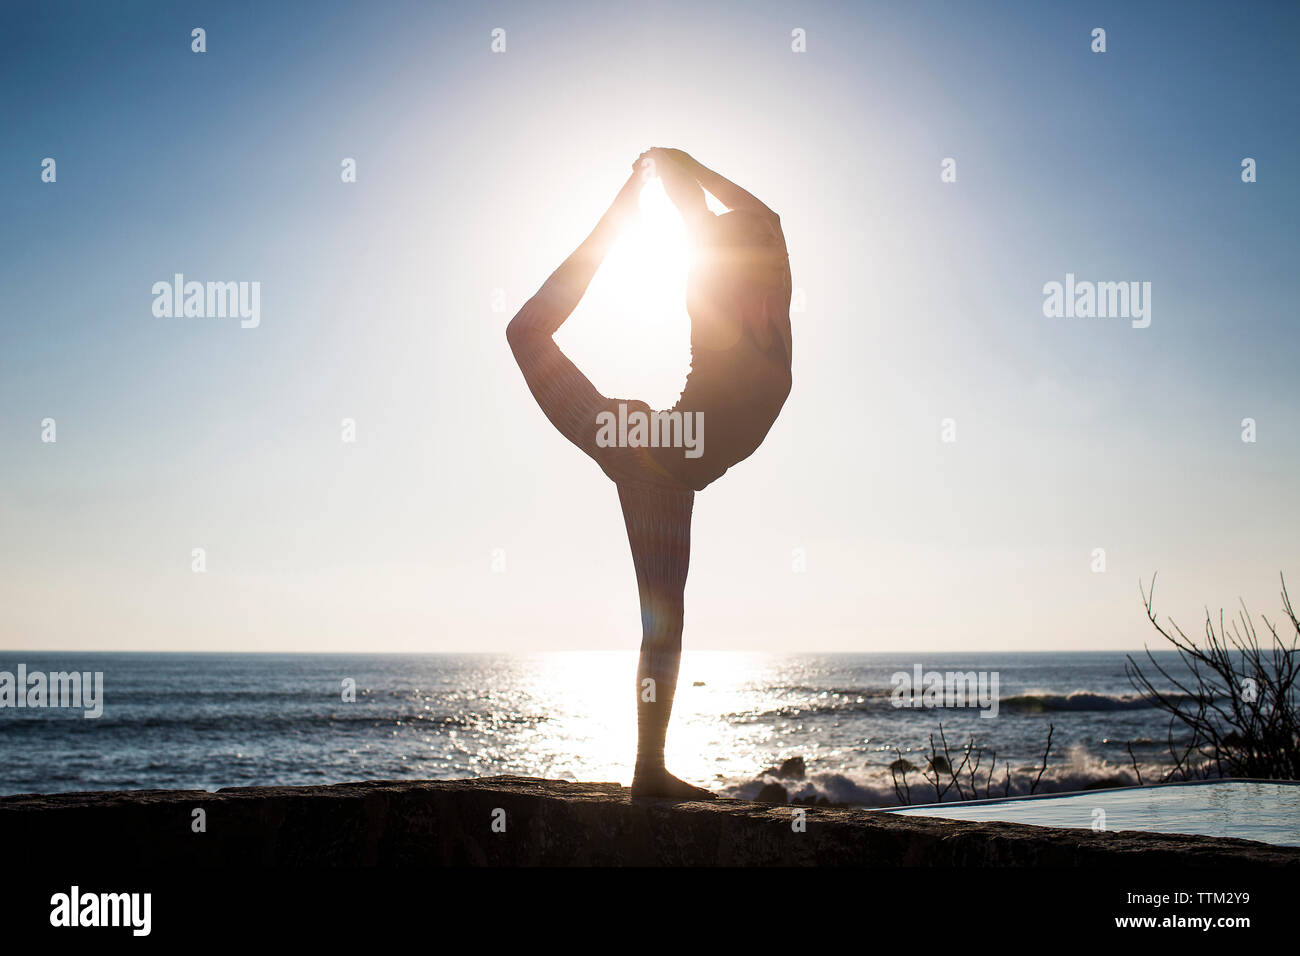 Woman practicing Shiva posture against sea and clear sky during sunny day Stock Photo